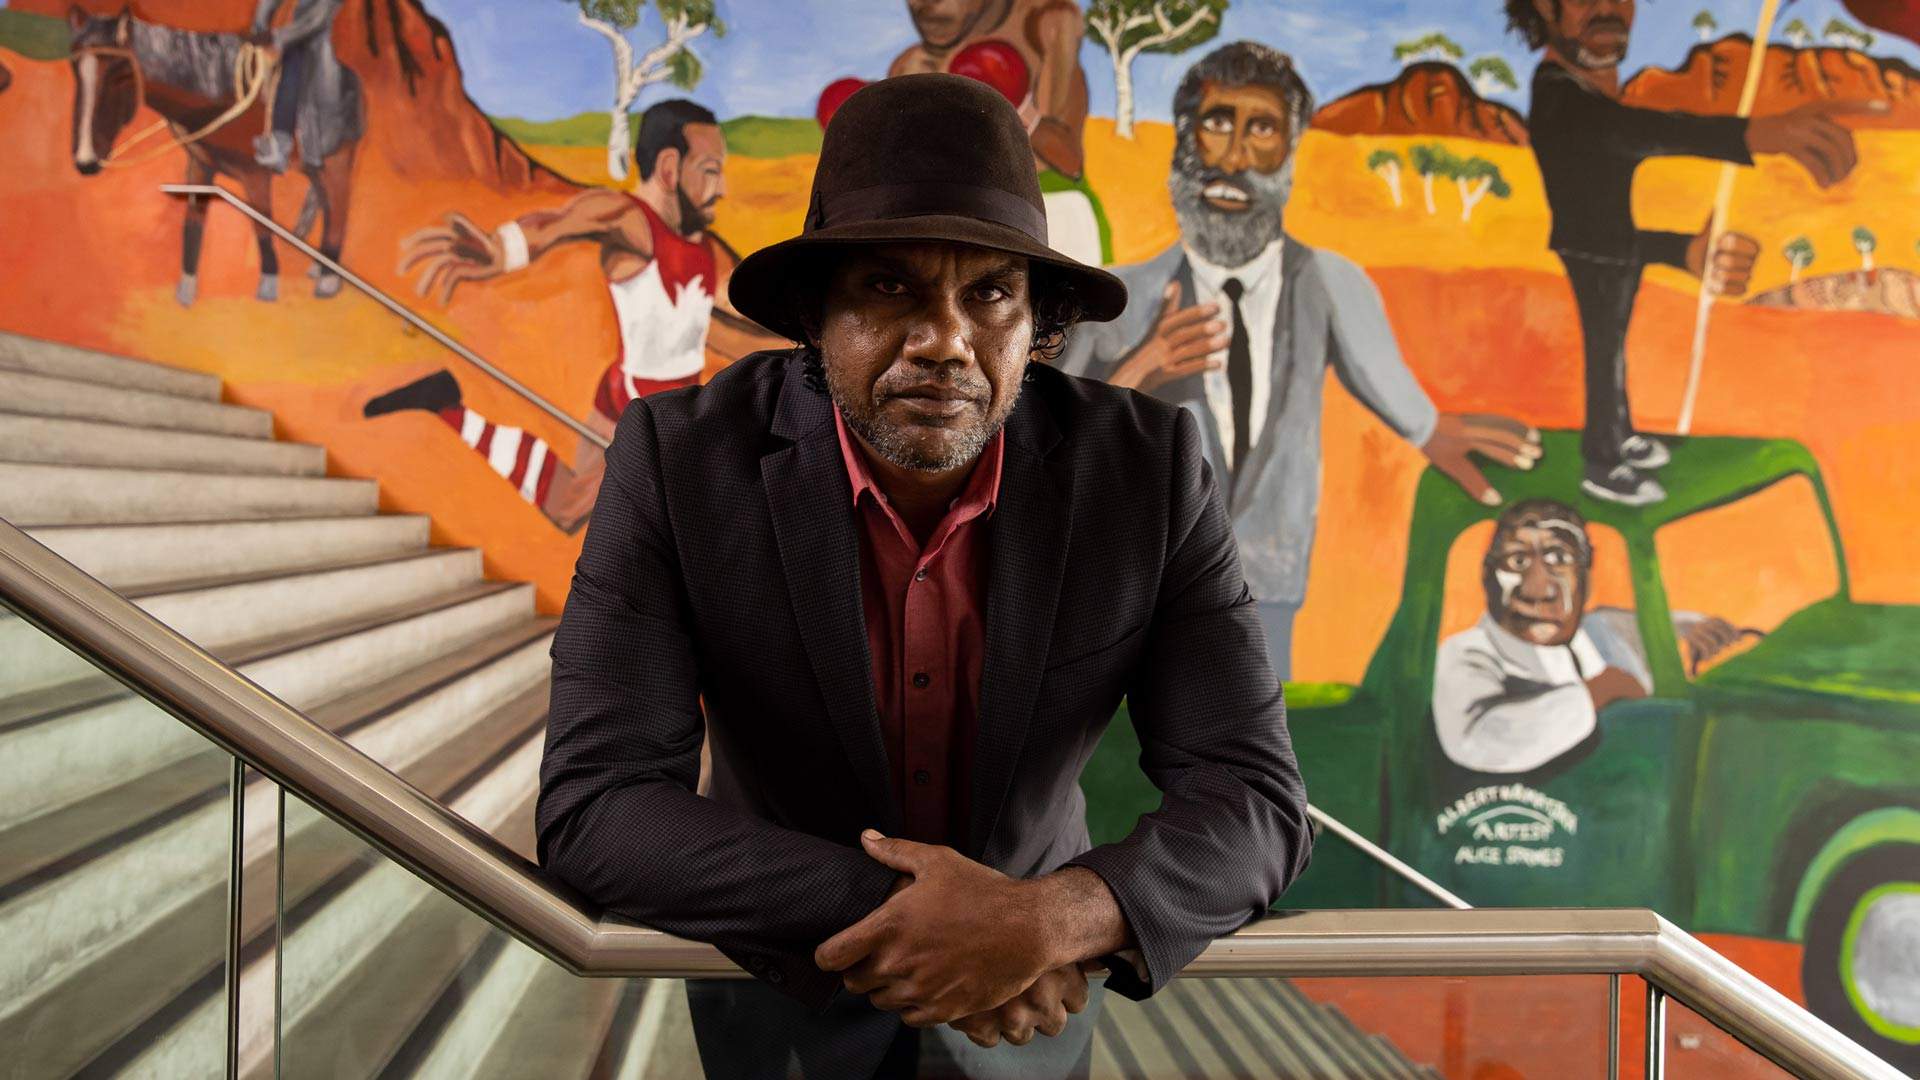 A New Mural By Archibald Prize Winner Vincent Namatjira Has Been Unveiled in Circular Quay